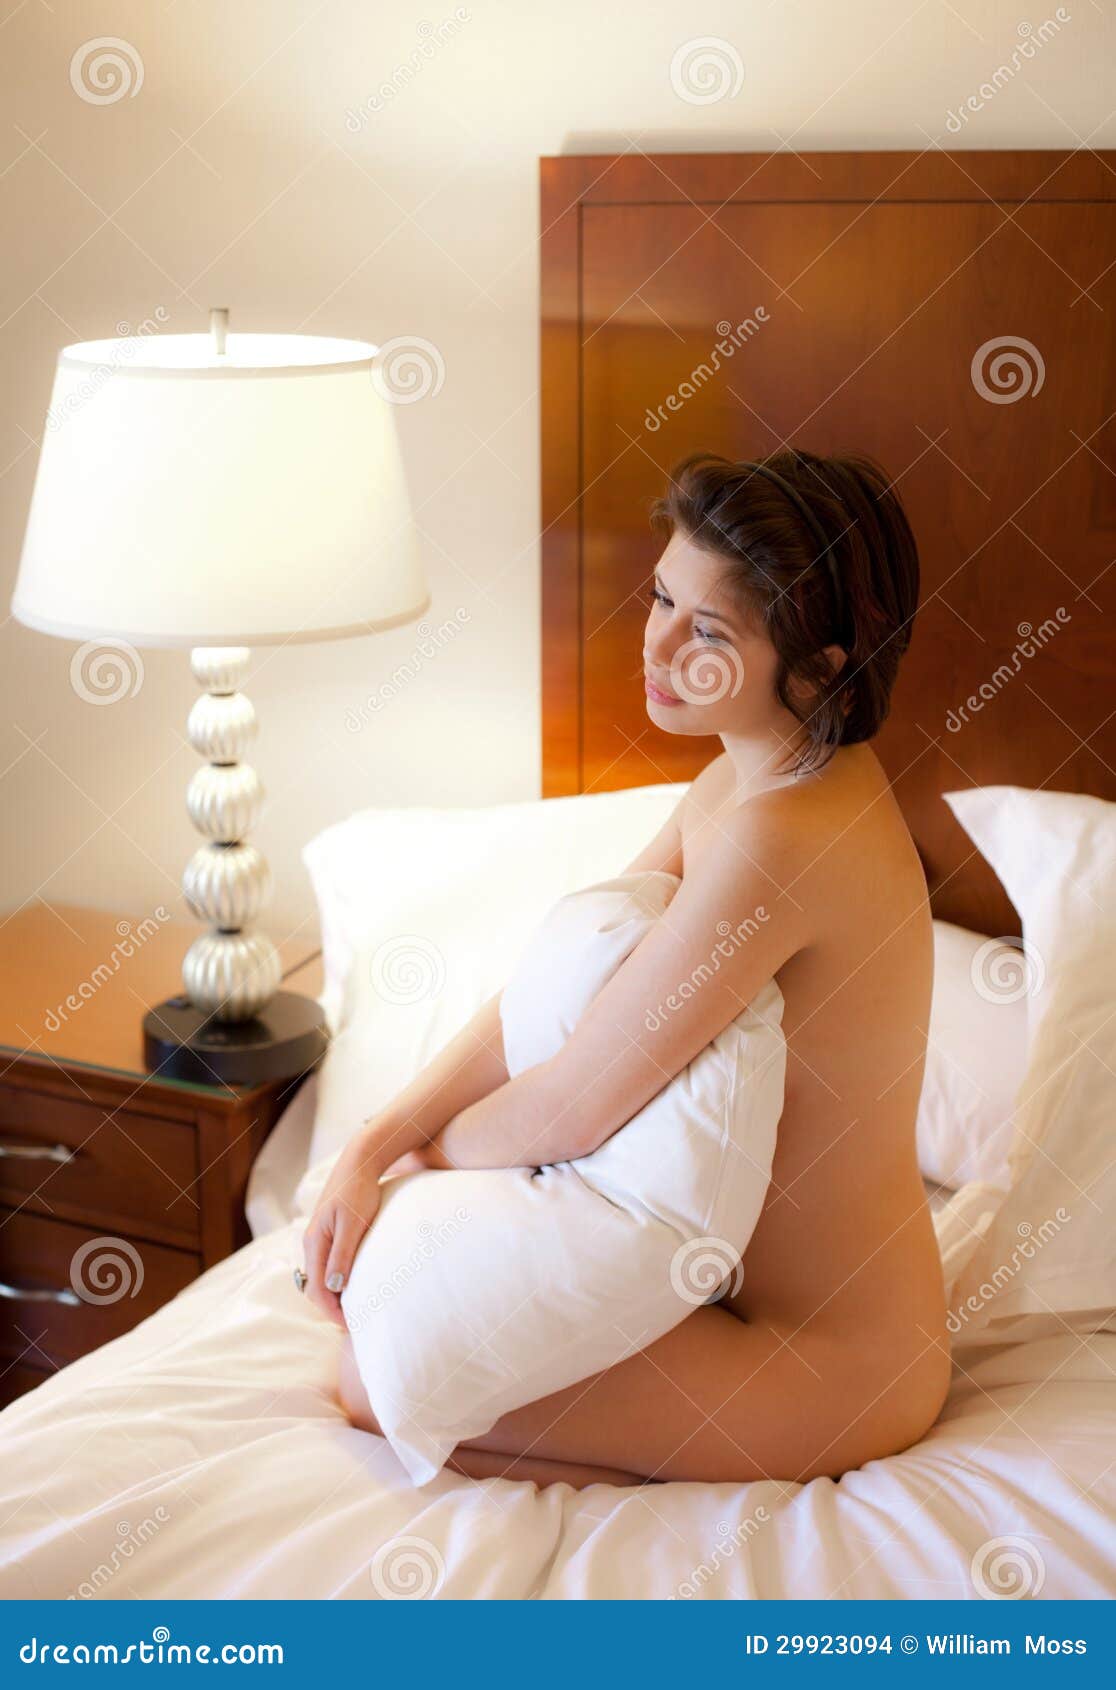 Naked Woman Knees On Pillow 39